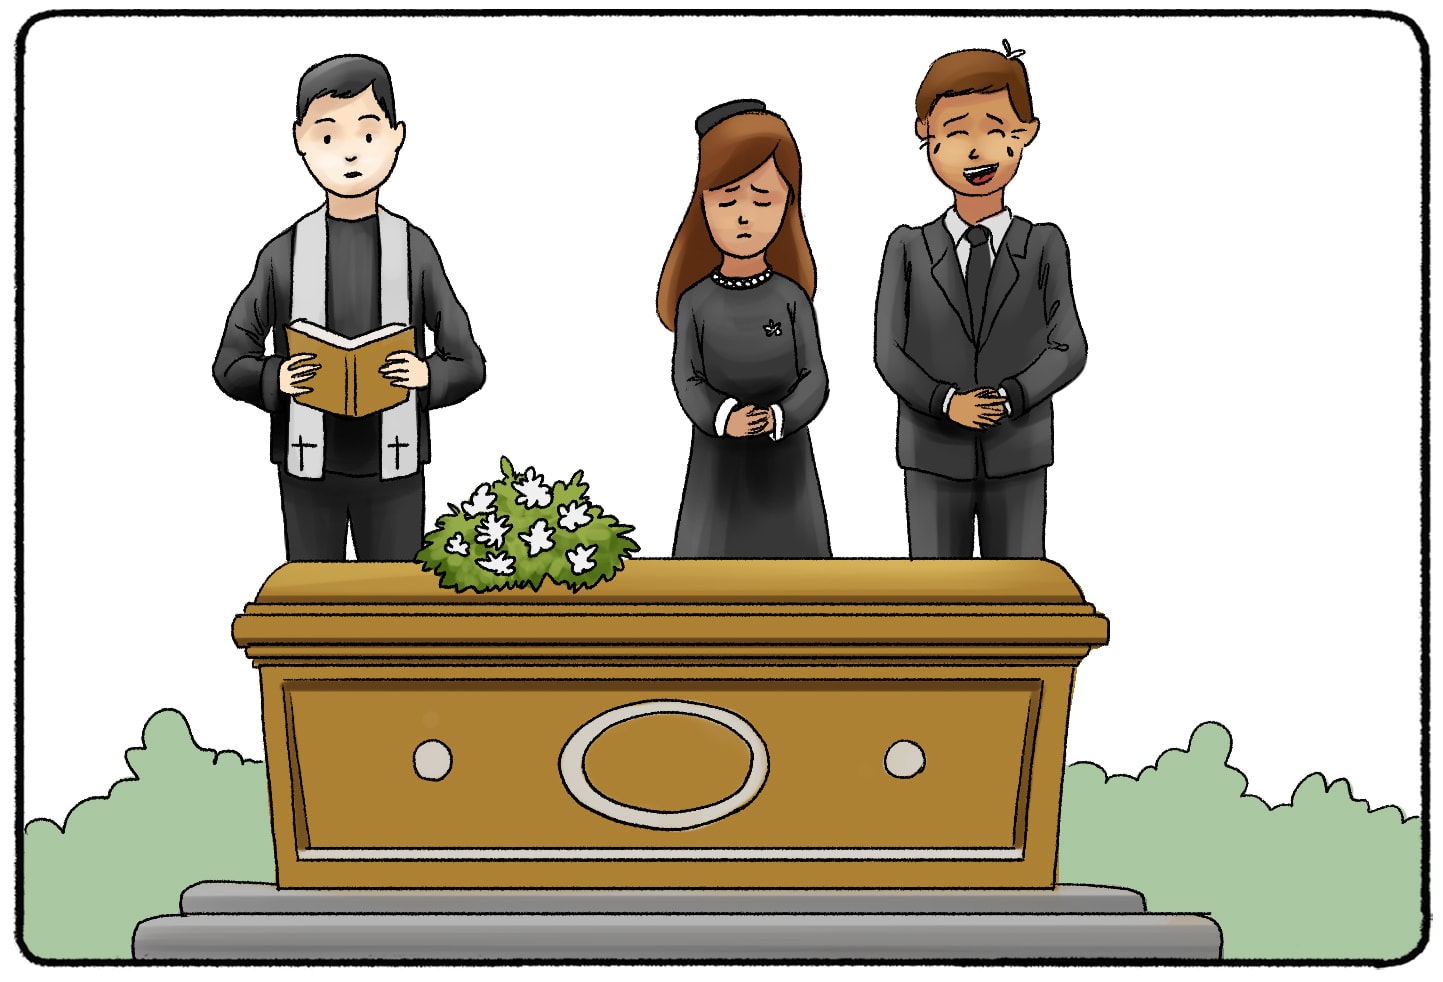 a person laughing at a funeral